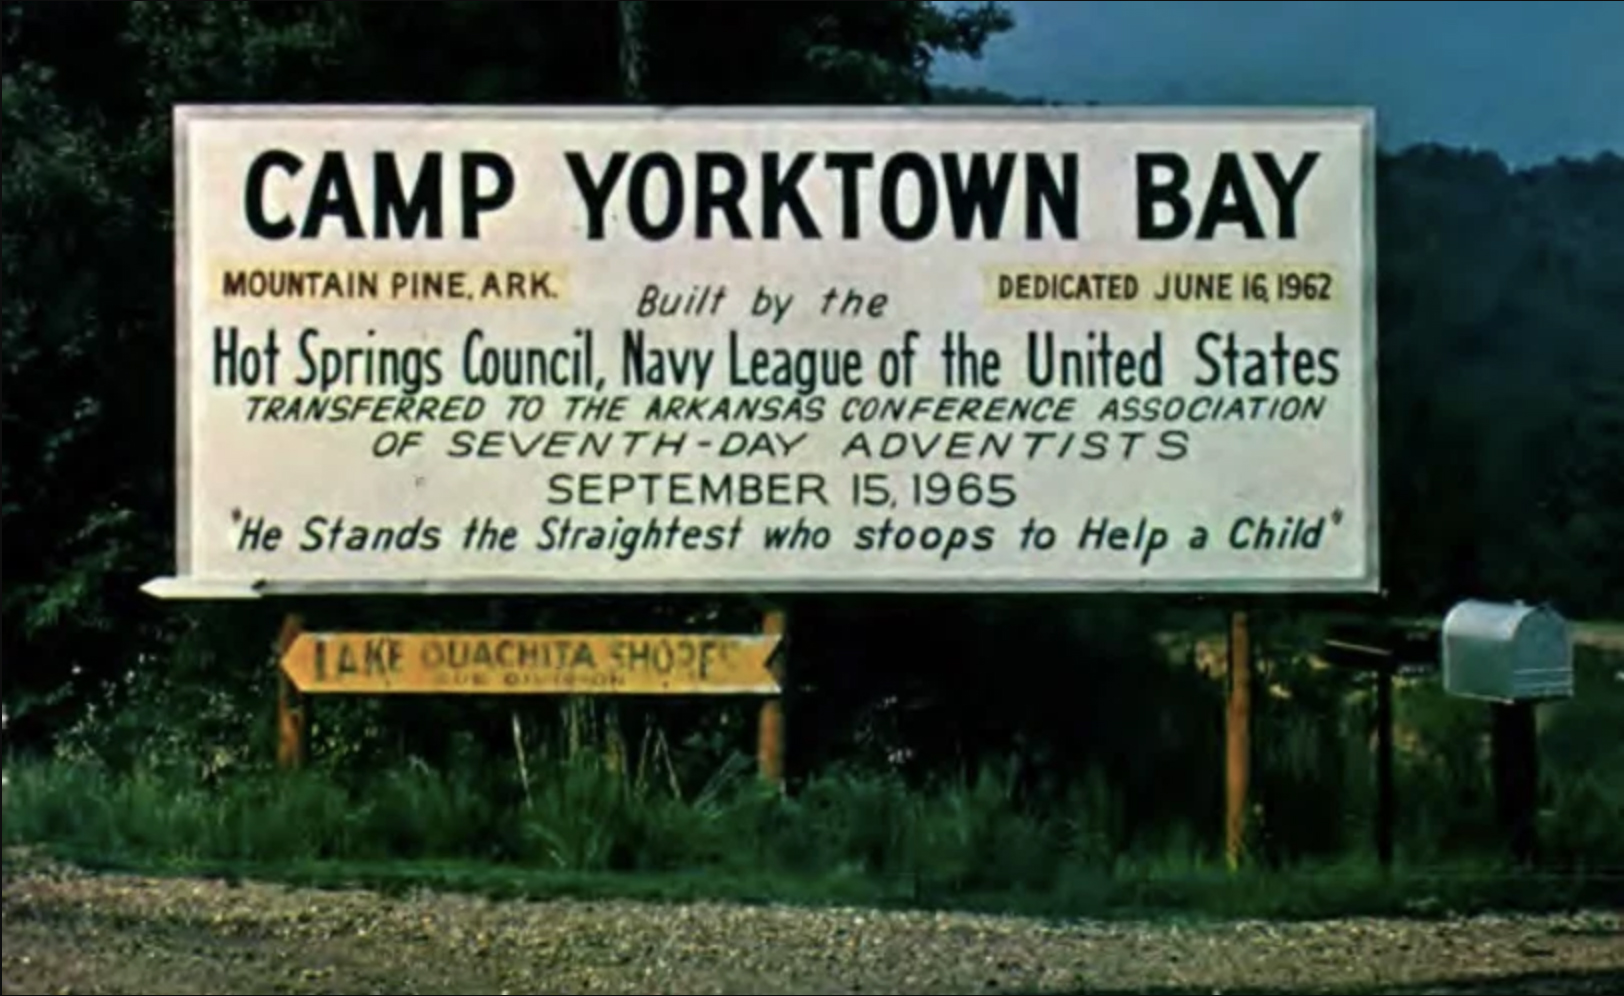 The historical Camp Yorktown Bay sign shares a few tidbits of the camp’s history Photo from arklayouth.com